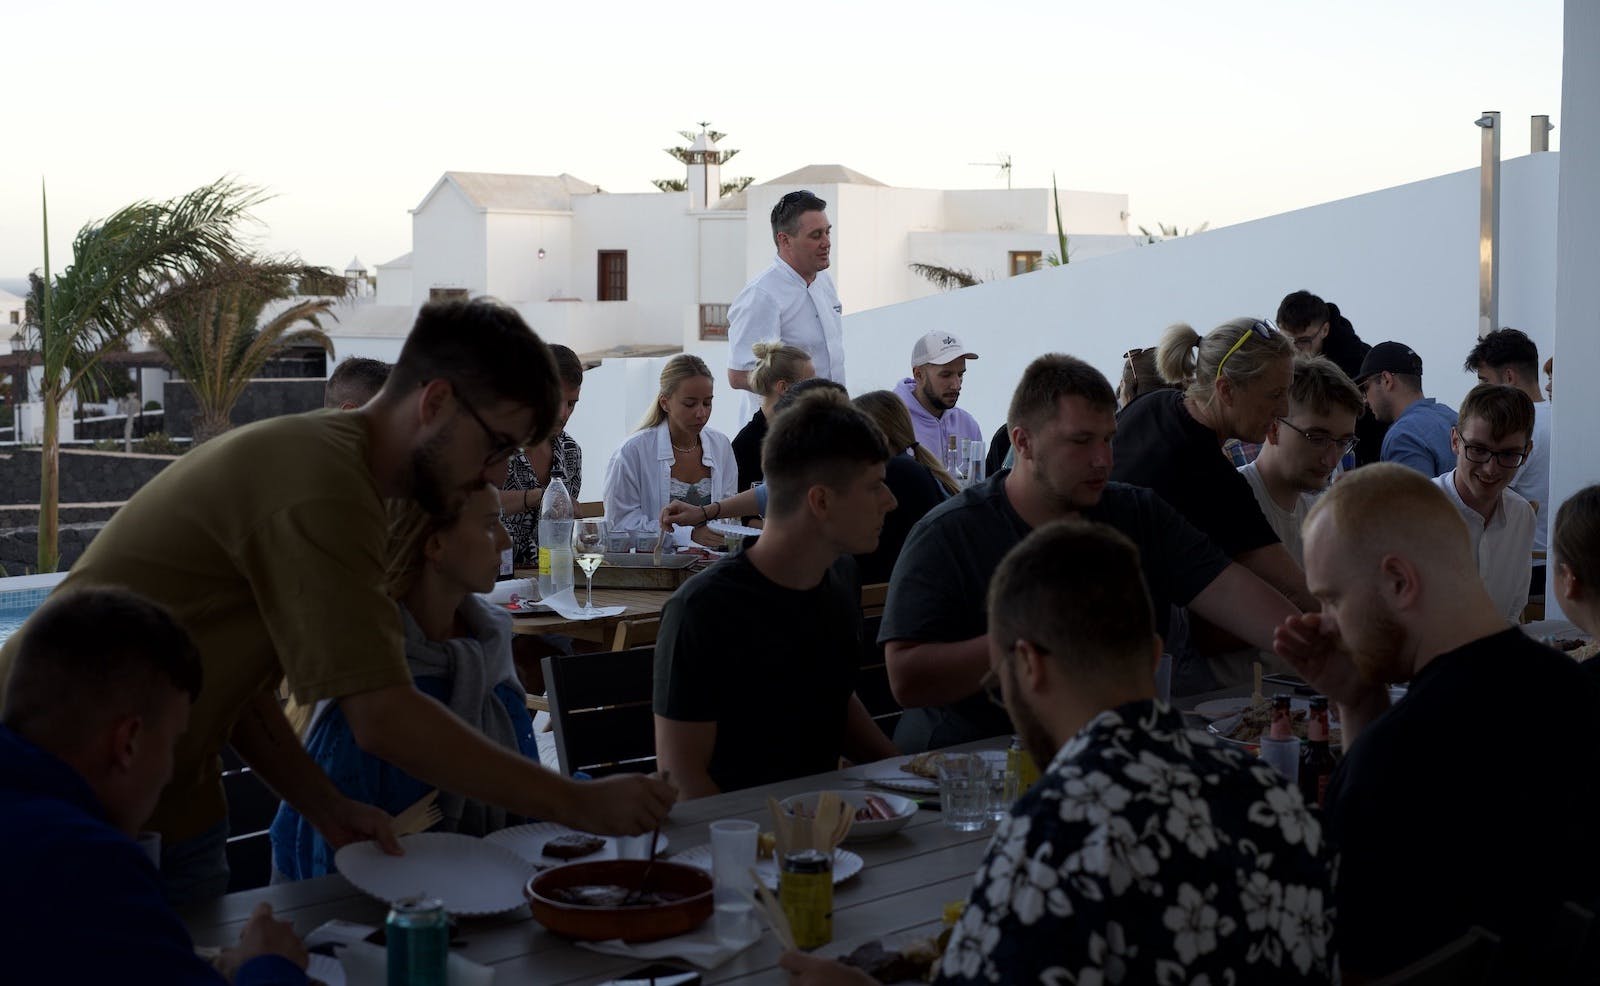 Sudoers eating together in Lanzarote at a company workation